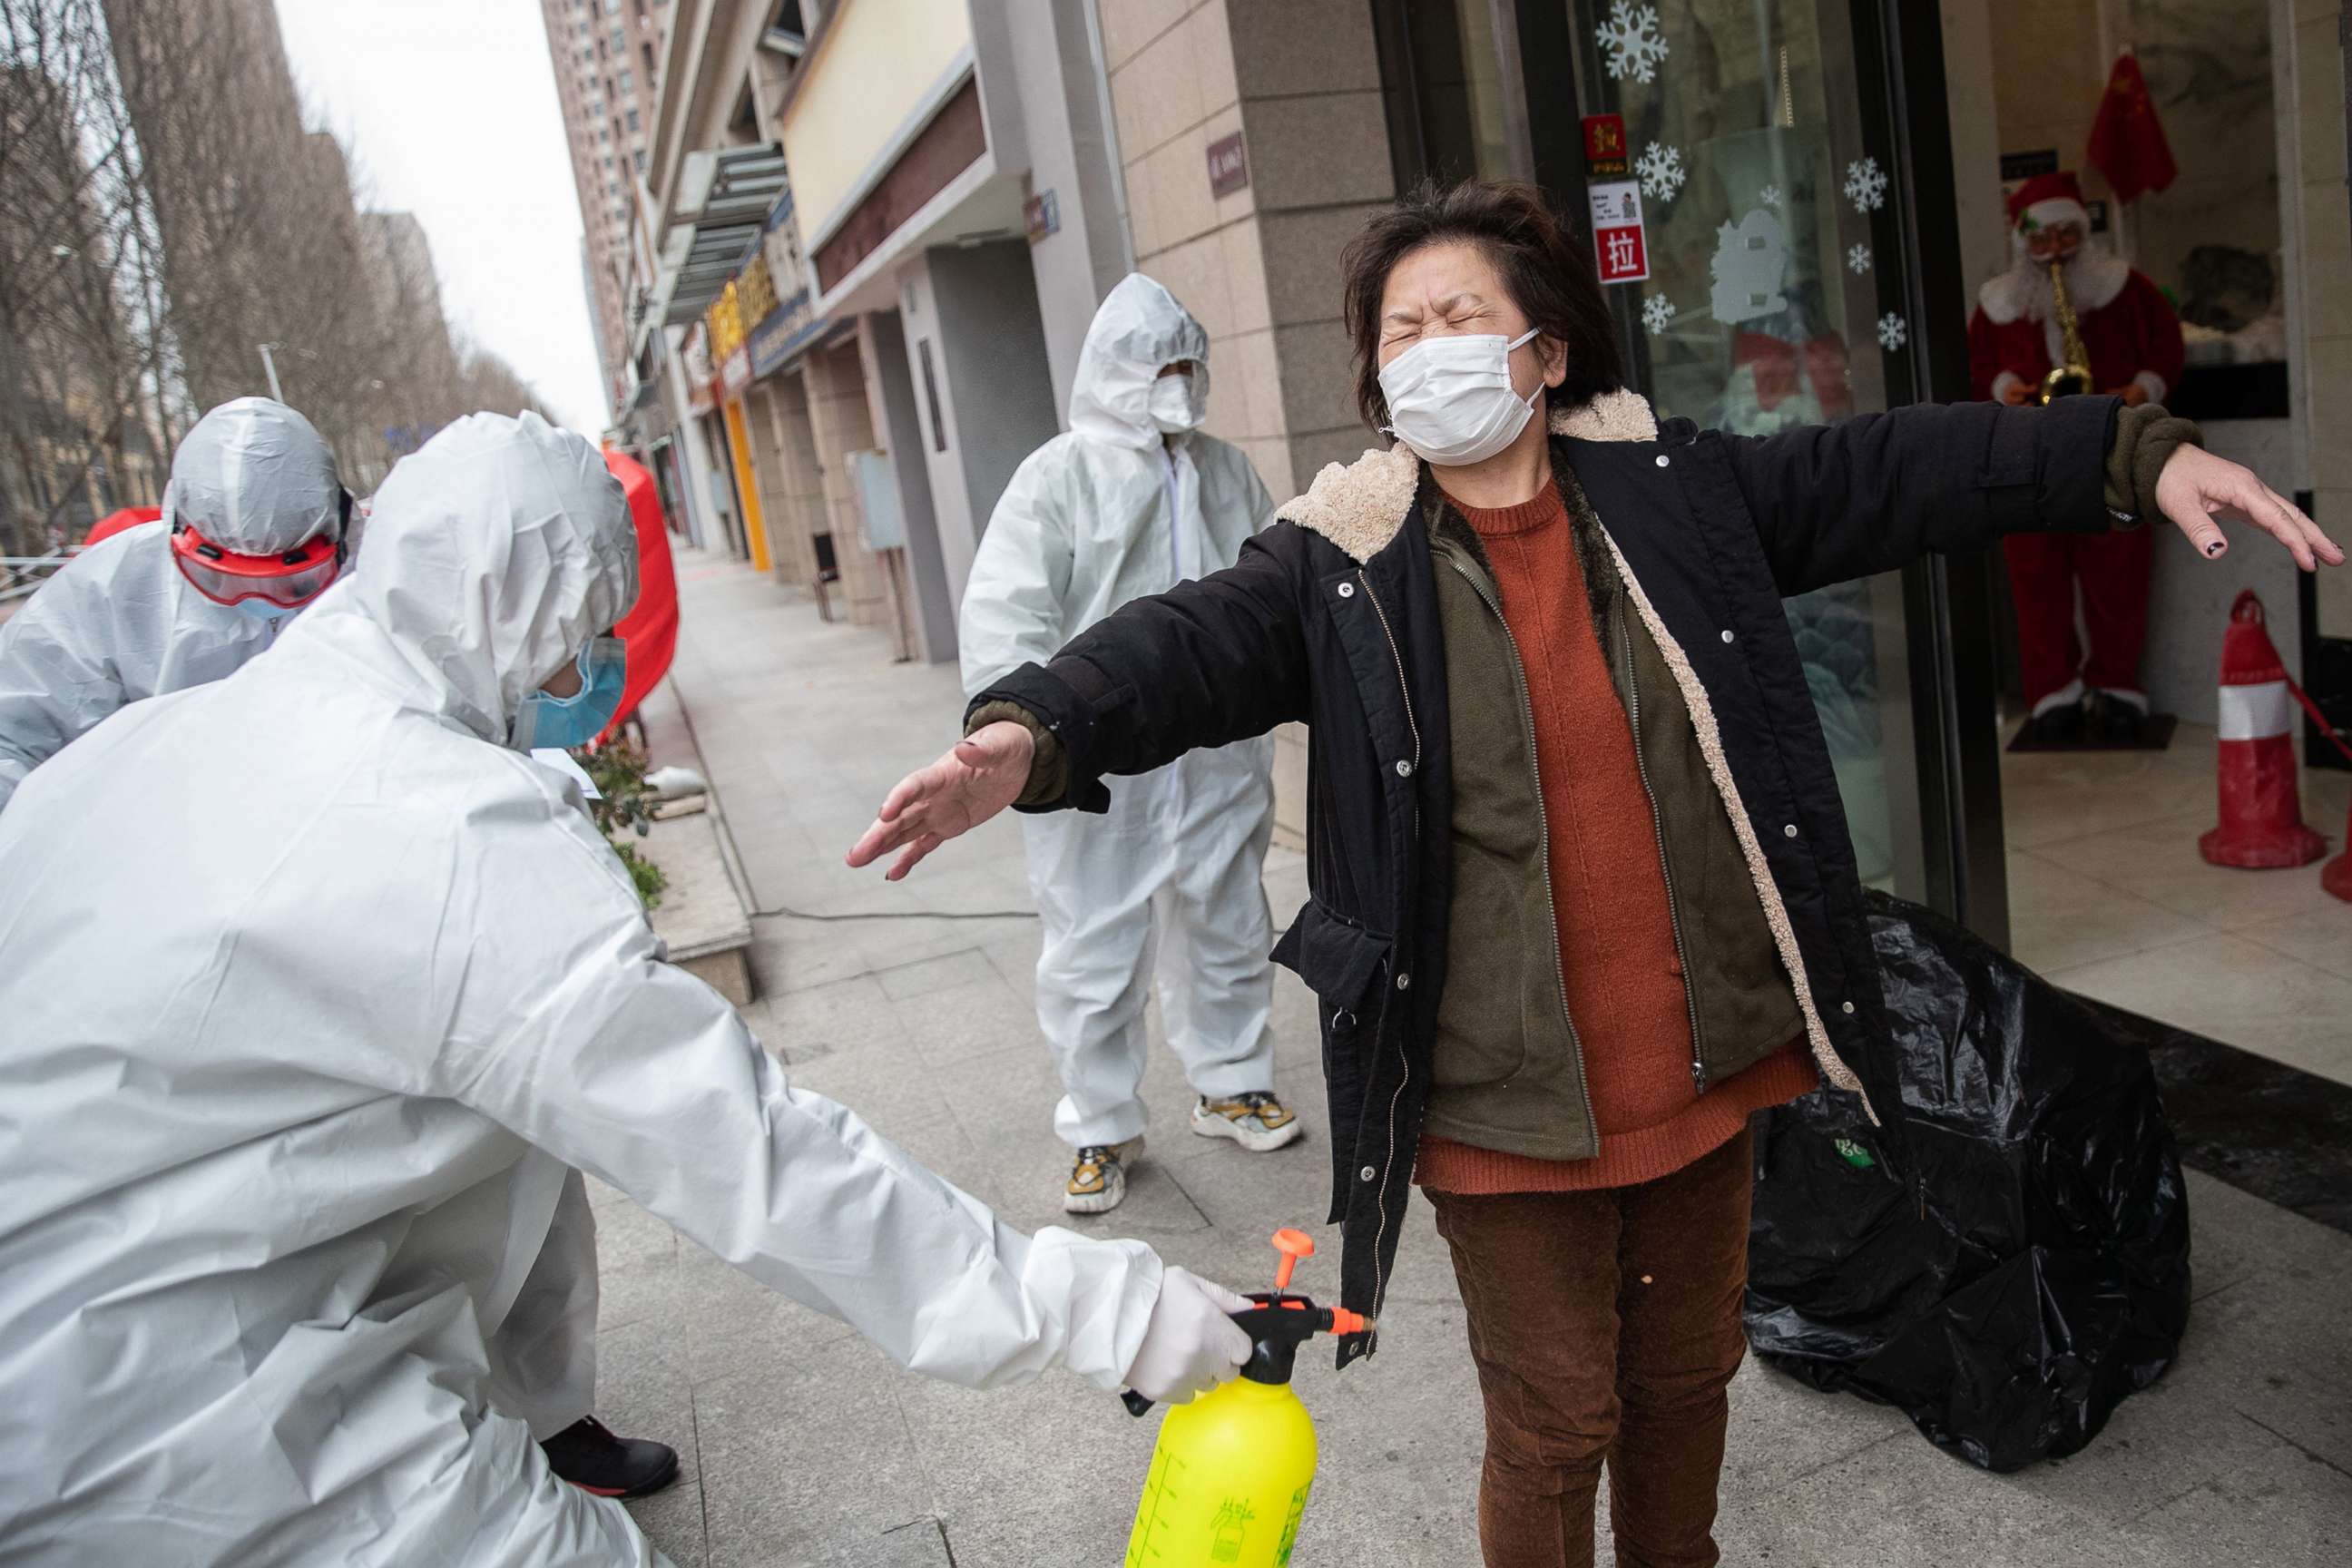 PHOTO: A woman who has recovered from the coronavirus is disinfected by volunteers as she arrives at a hotel for a 14-day quarantine after being discharged from a hospital in Wuhan, in China, March 1, 2020.